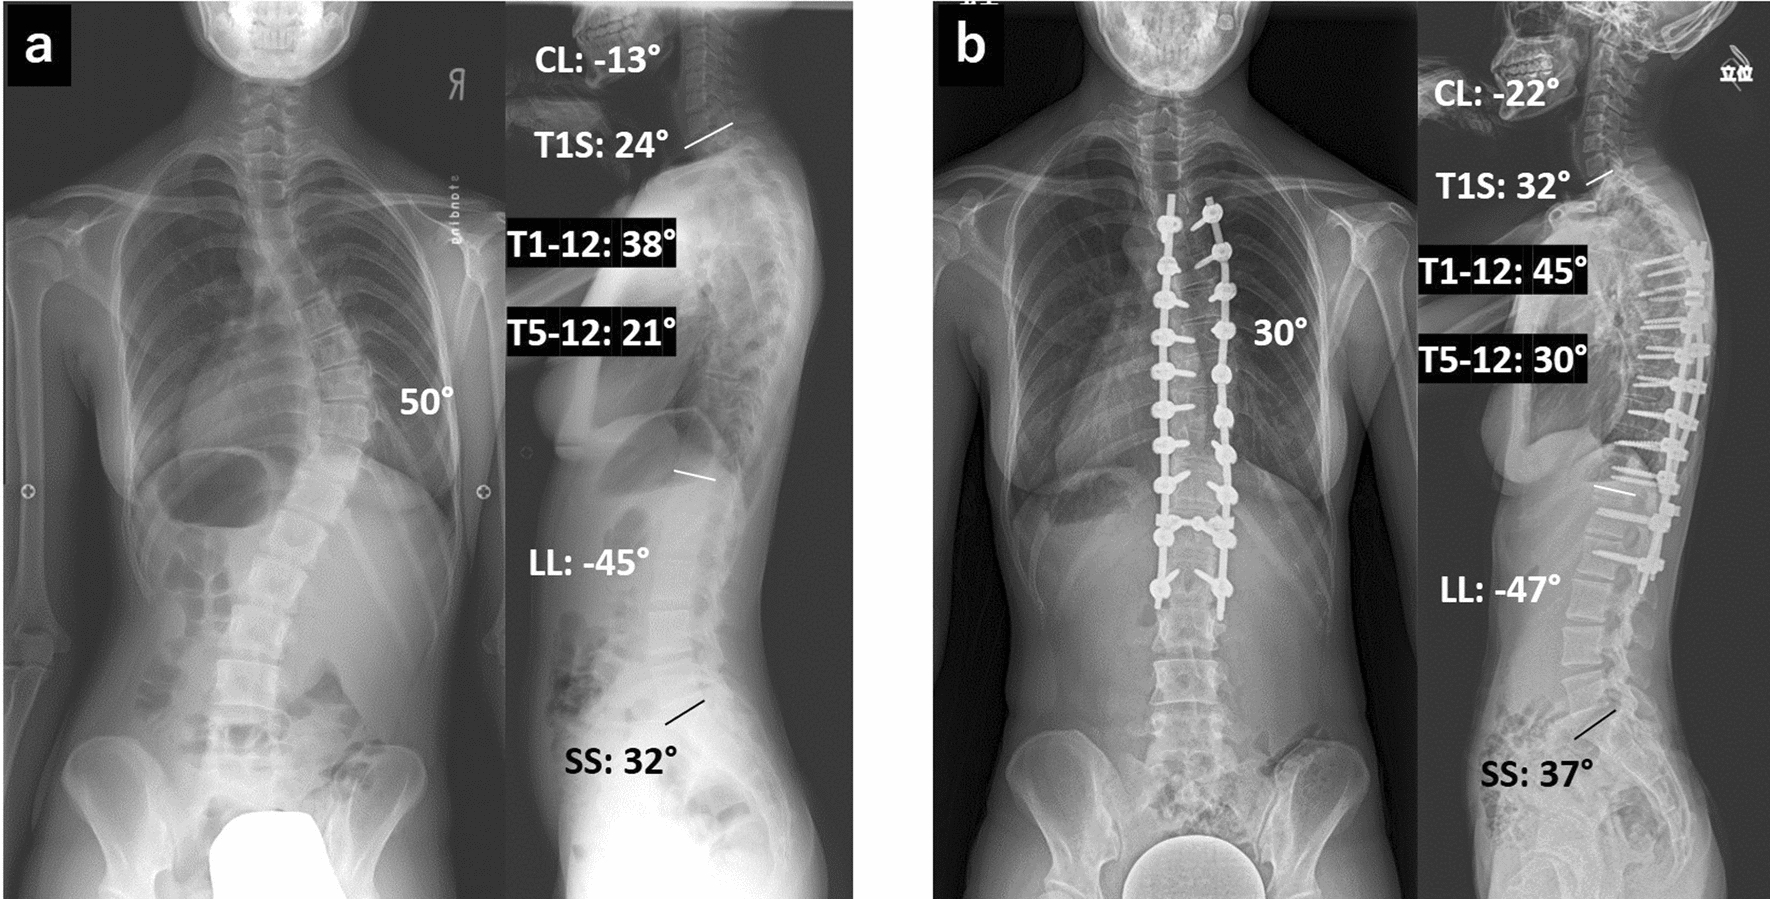 Neck and shoulder pain in thoracic adolescent idiopathic scoliosis 10 years after posterior spinal fusion